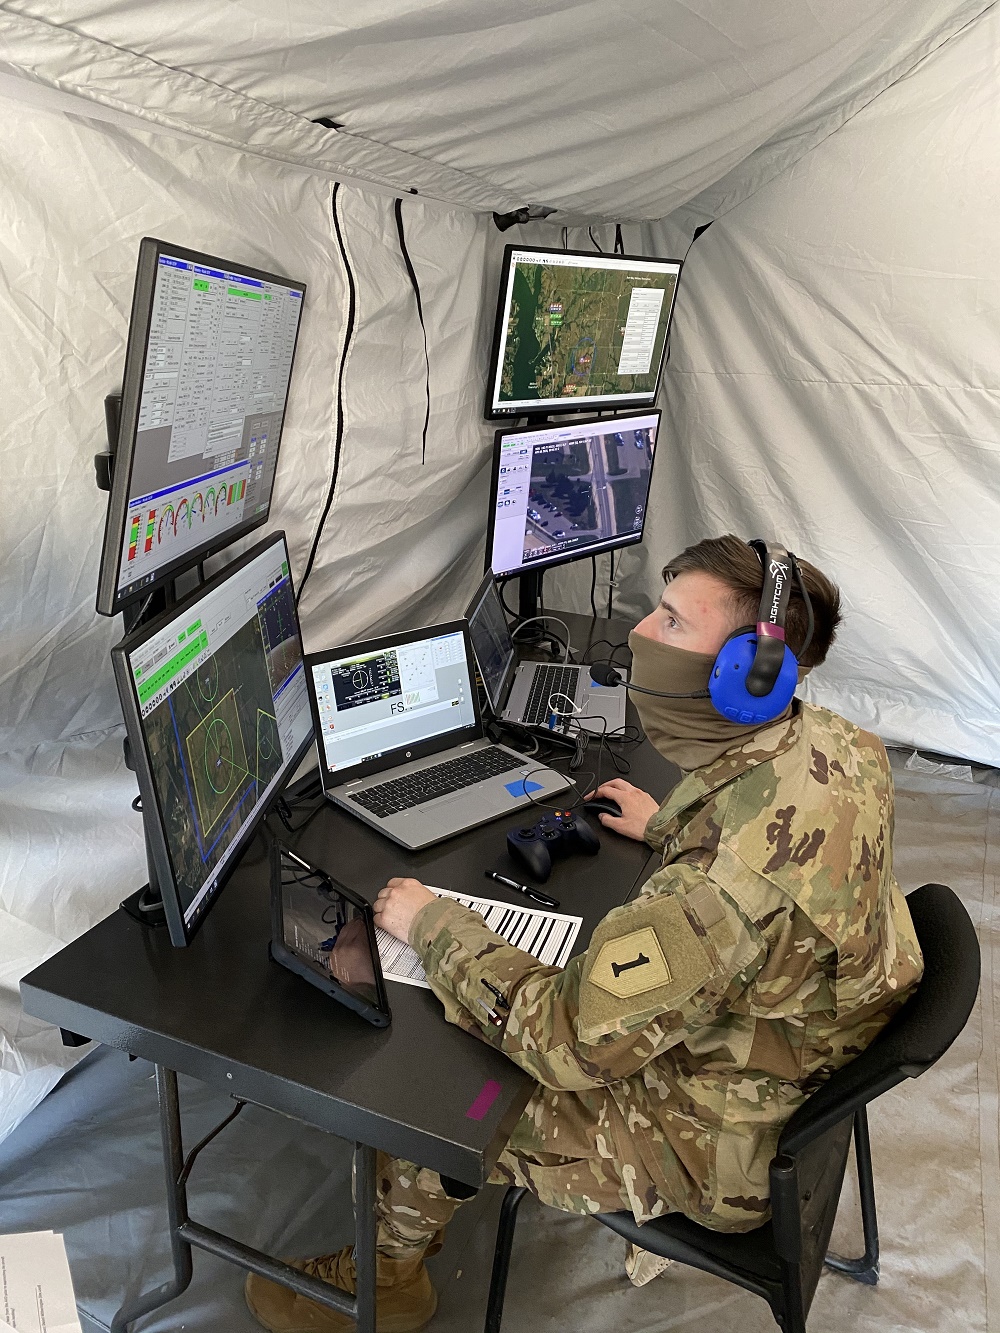 Spc. Nicholas Miller assigned to 1st Engineer Battalion, 1st Infantry Division, conducts flight operations through a laptop based ground control station during the FTUAS capabilities assessment at Fort Riley, Kansas, April 8, 2020 (Photo Credit: Program Executive Office Aviation )